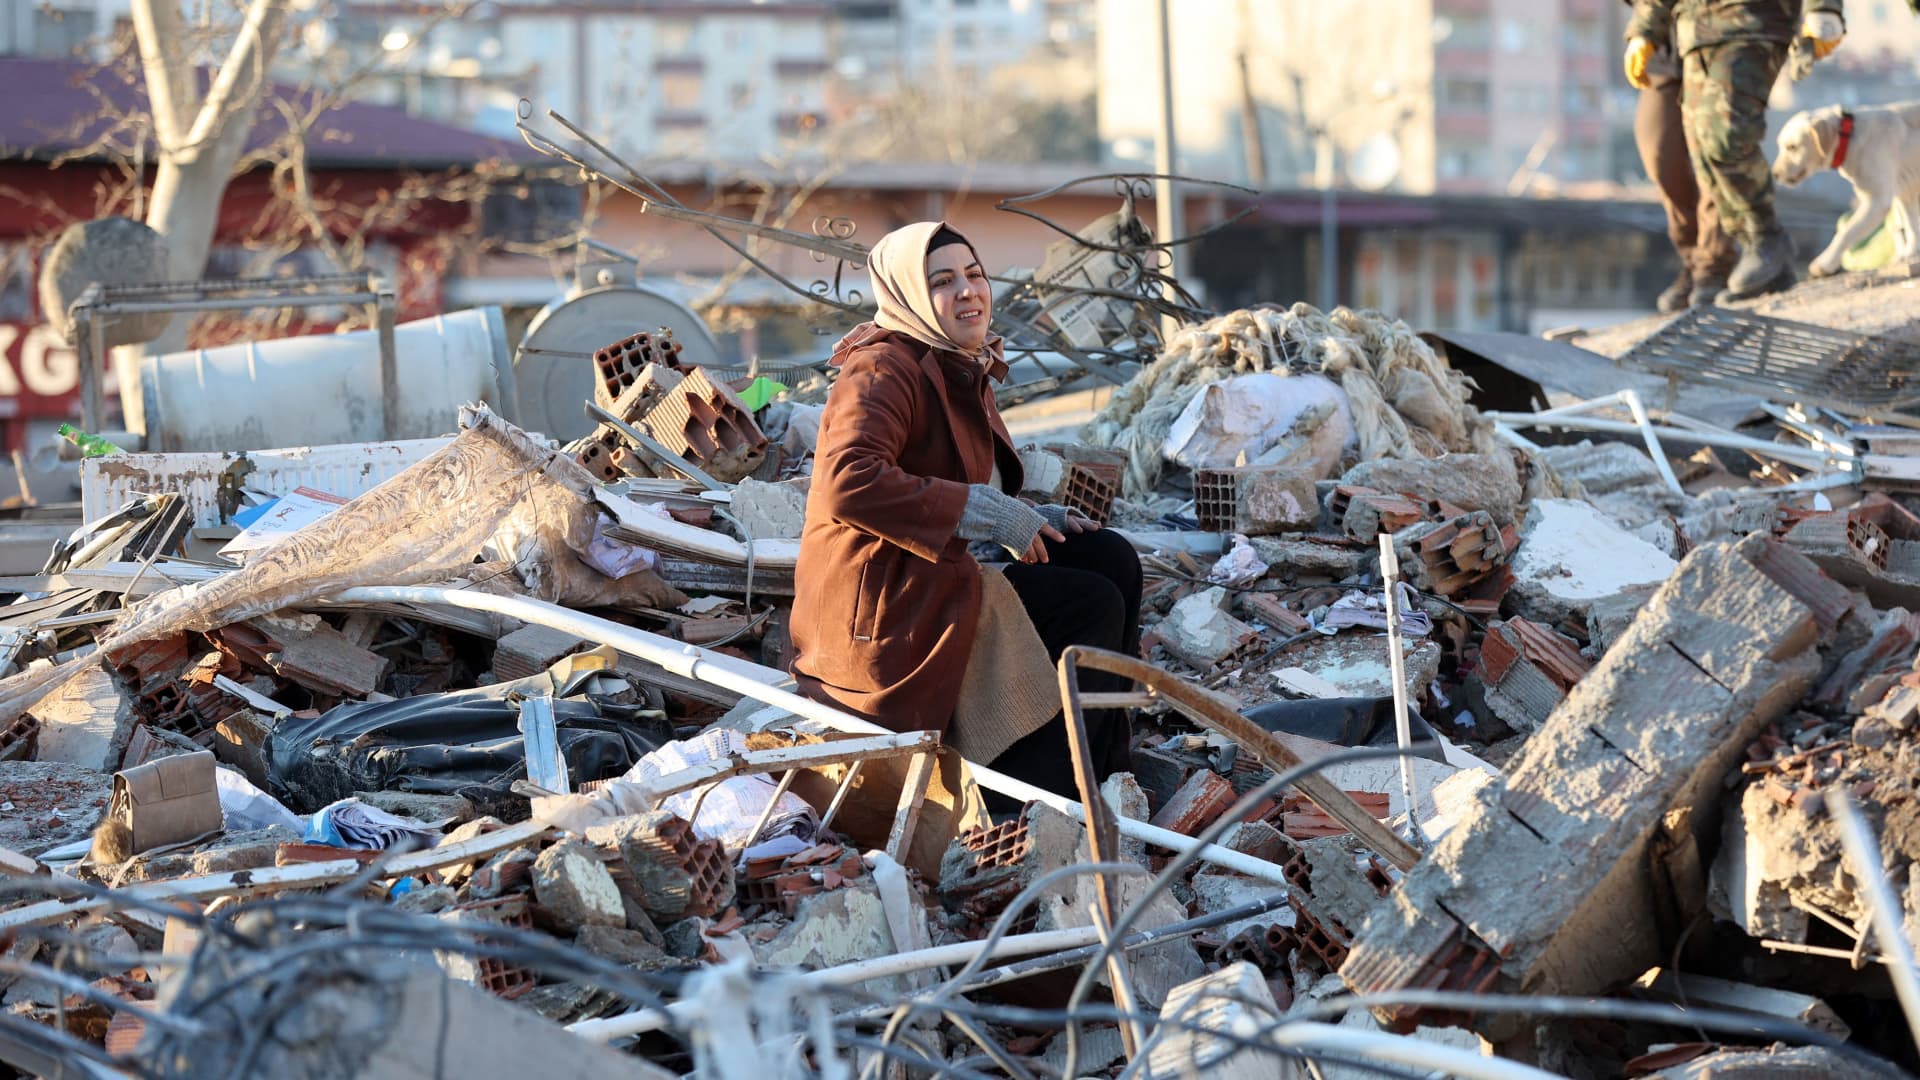 The rubble of a destroyed building in Kahramanmaras, southern Turkey, on Feb. 7, 2023, a day after a 7.8-magnitude earthquake struck the country's southeast.